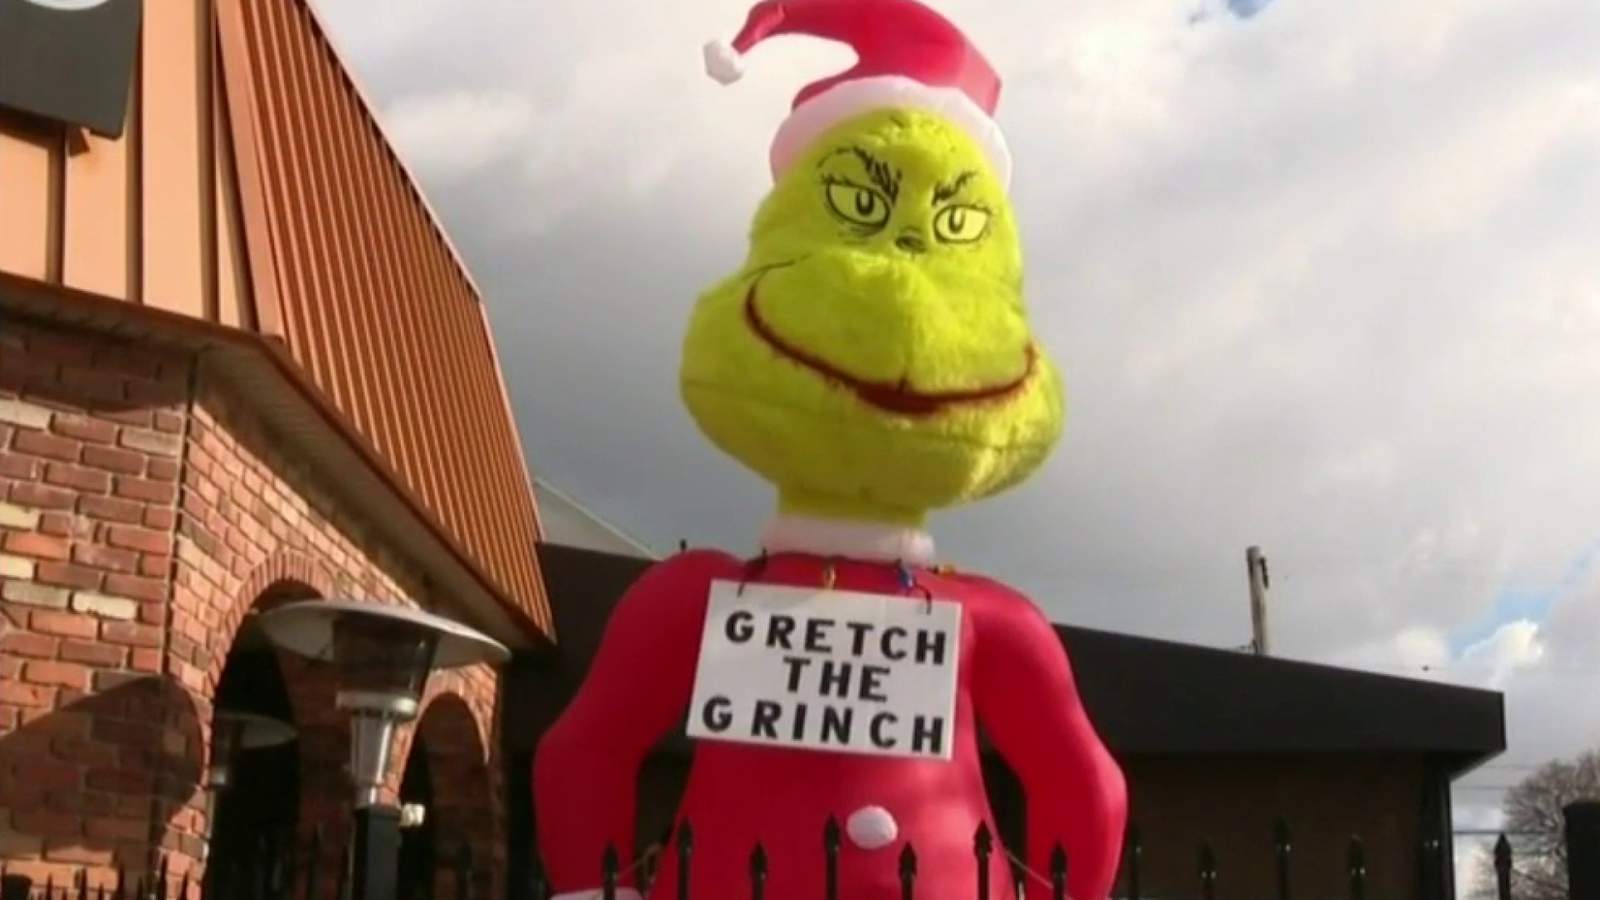 Christmas inflatable ‘Gretch the Grinch’ at Trenton restaurant causes controversy